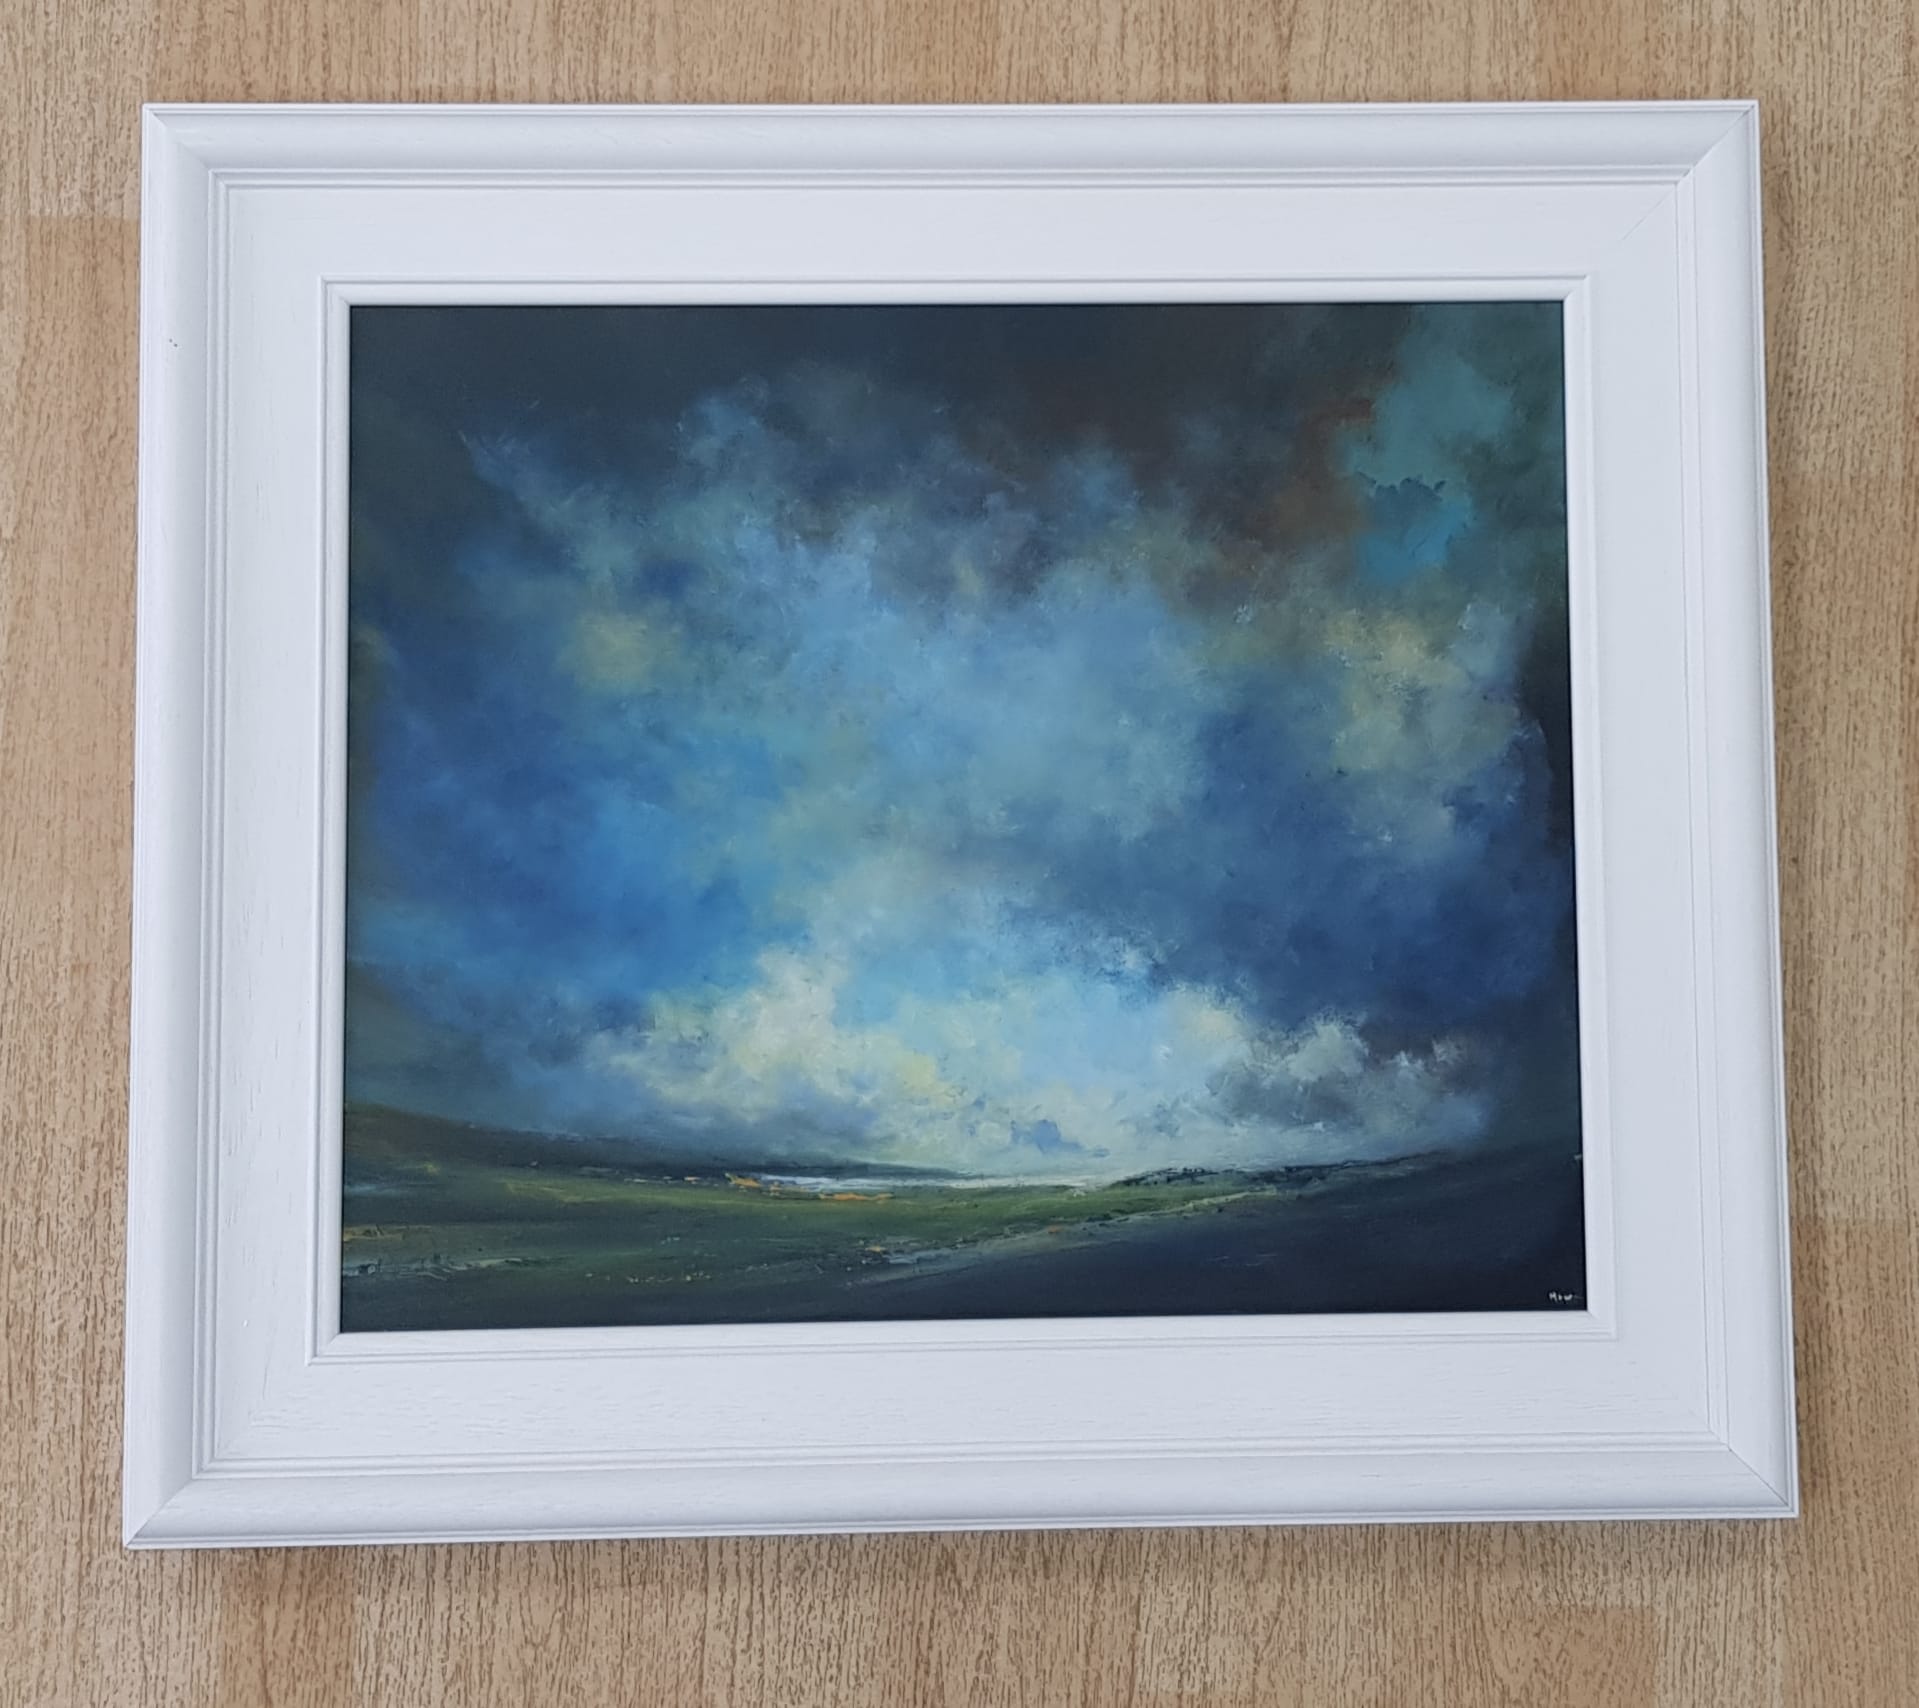 HUW RICHARDS EVANS oil on canvas - entitled 'Light of my Life 2', 60 x 60cms, framed in white - Image 2 of 2